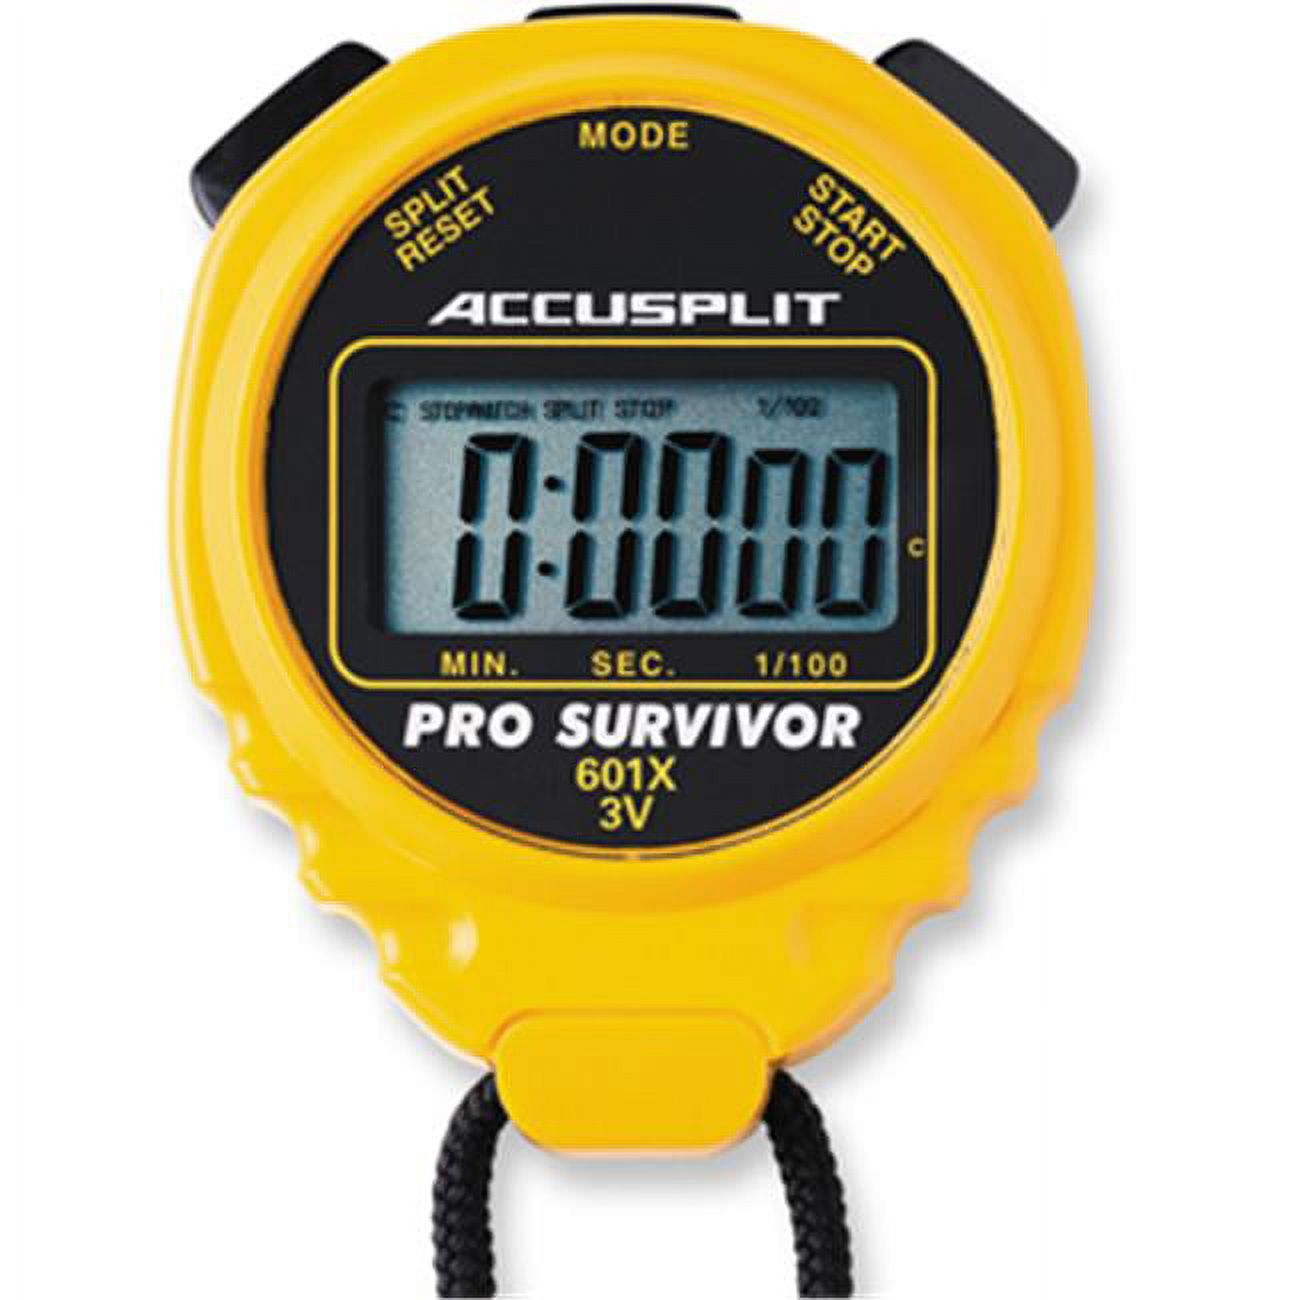 Accusplit A601XY Pro Survivor Stopwatch with Yellow Case - image 1 of 2